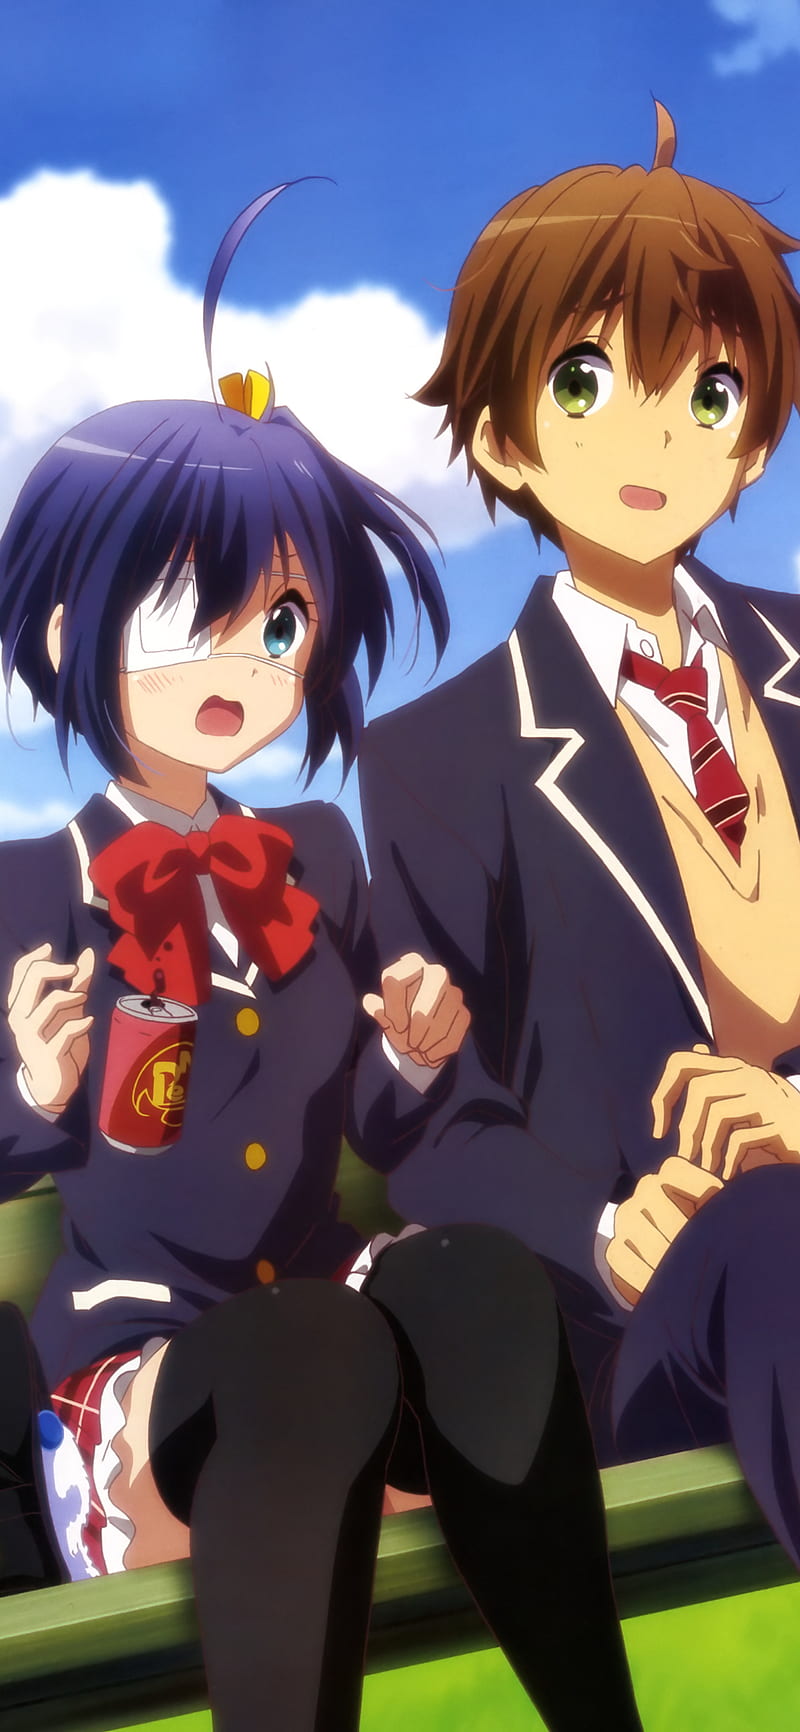 Love, Chunibyo & Other Delusions the Movie: Take on Me (HD 1080p